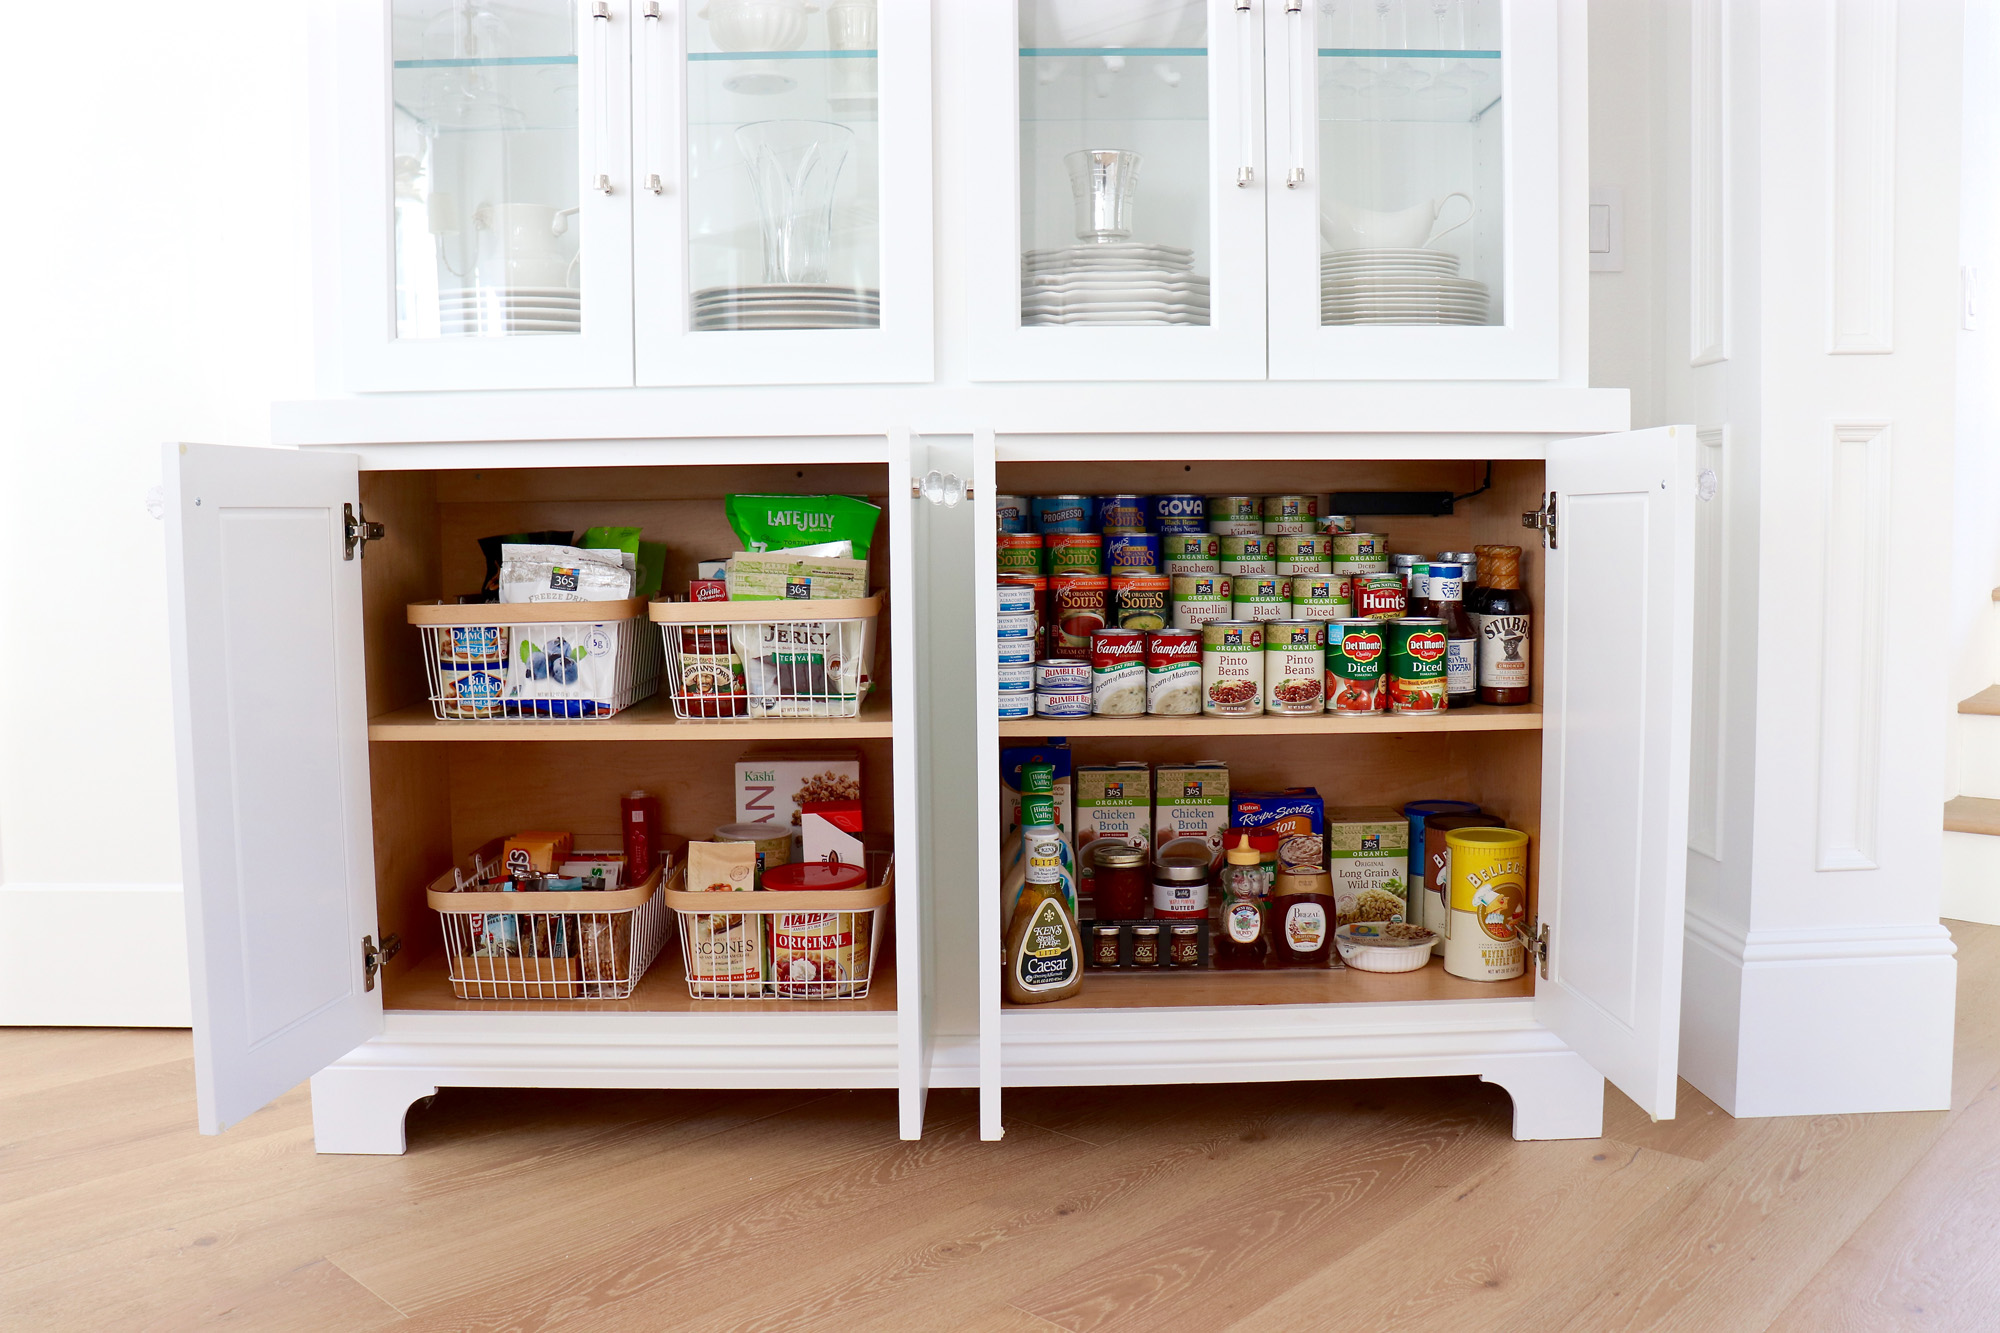 Organizing My Kitchen With Help From The Container Store